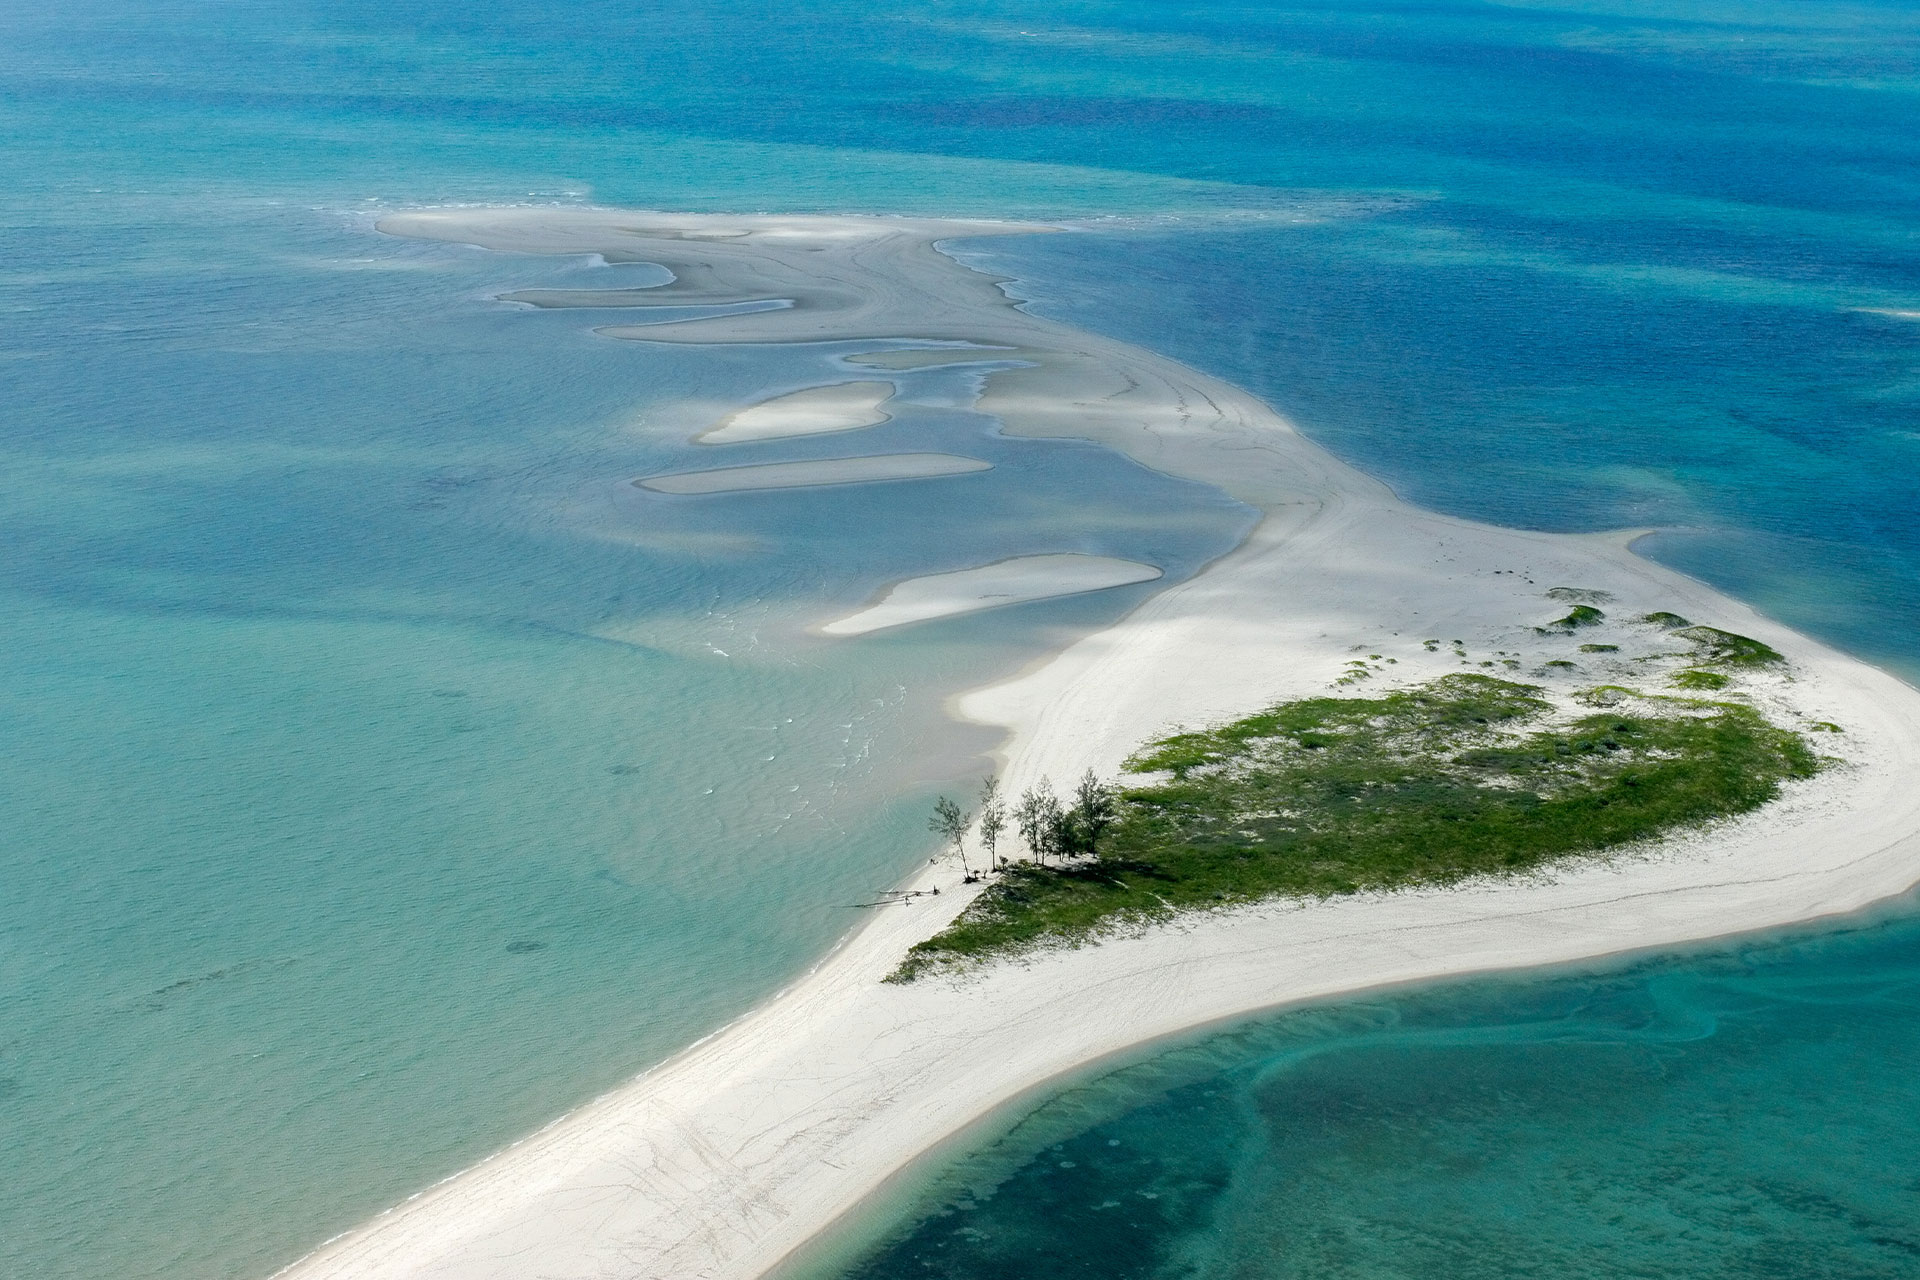 An island off the coast of Mozambique – one of the top honeymoon destinations in Africa.